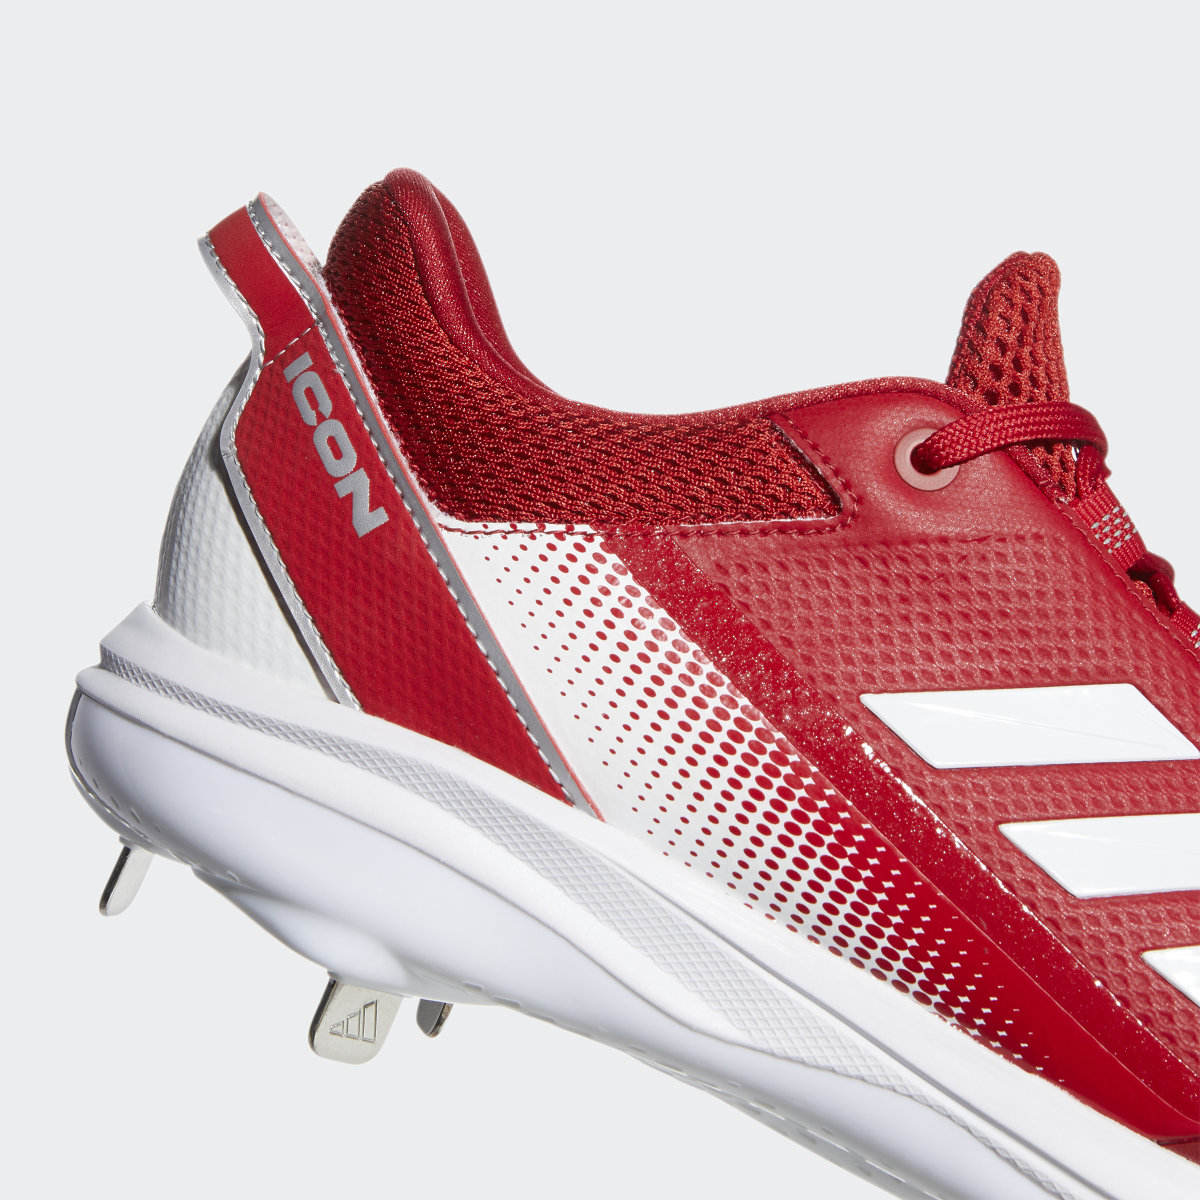 Adidas Icon 7 Cleats. 9